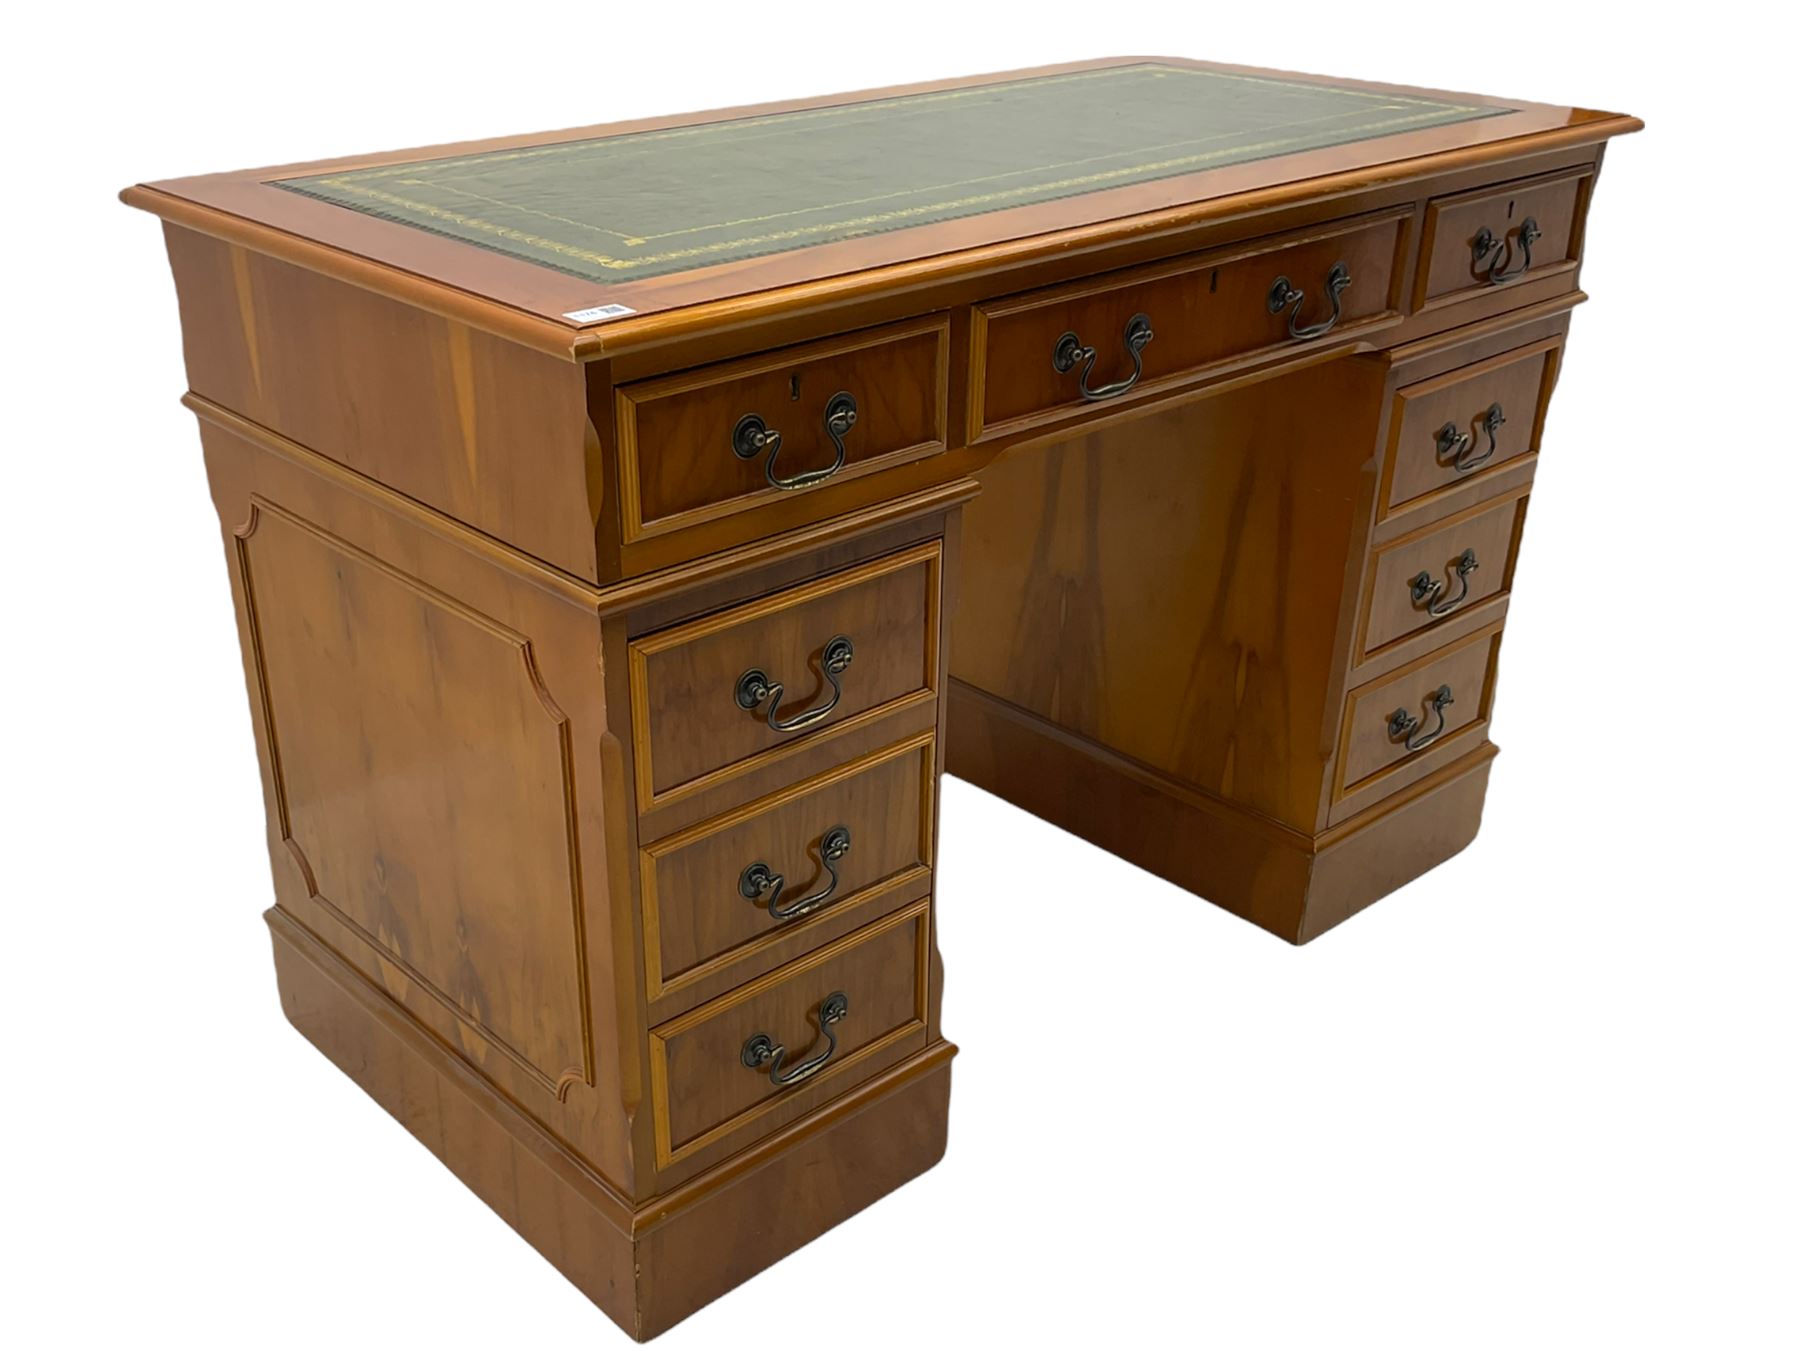 Yew wood twin pedestal office desk - Image 3 of 9